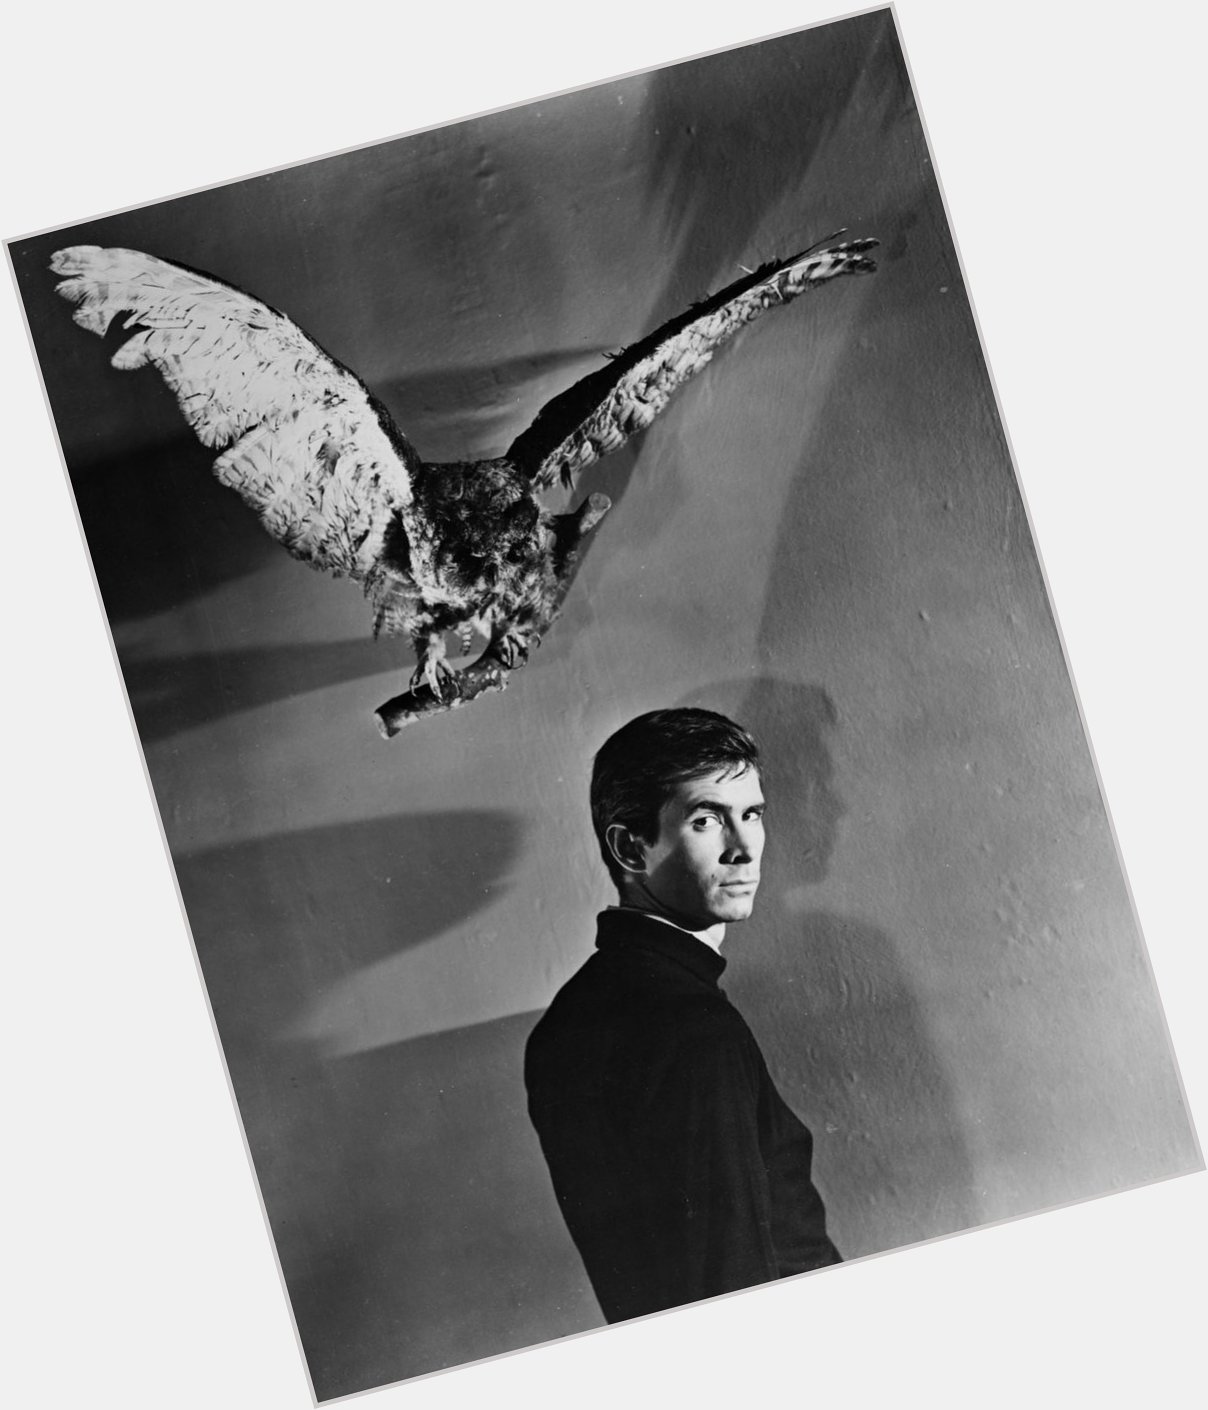 Happy Birthday Anthony Perkins - AKA - Norman Bates! We still admire and love your work to this day! 